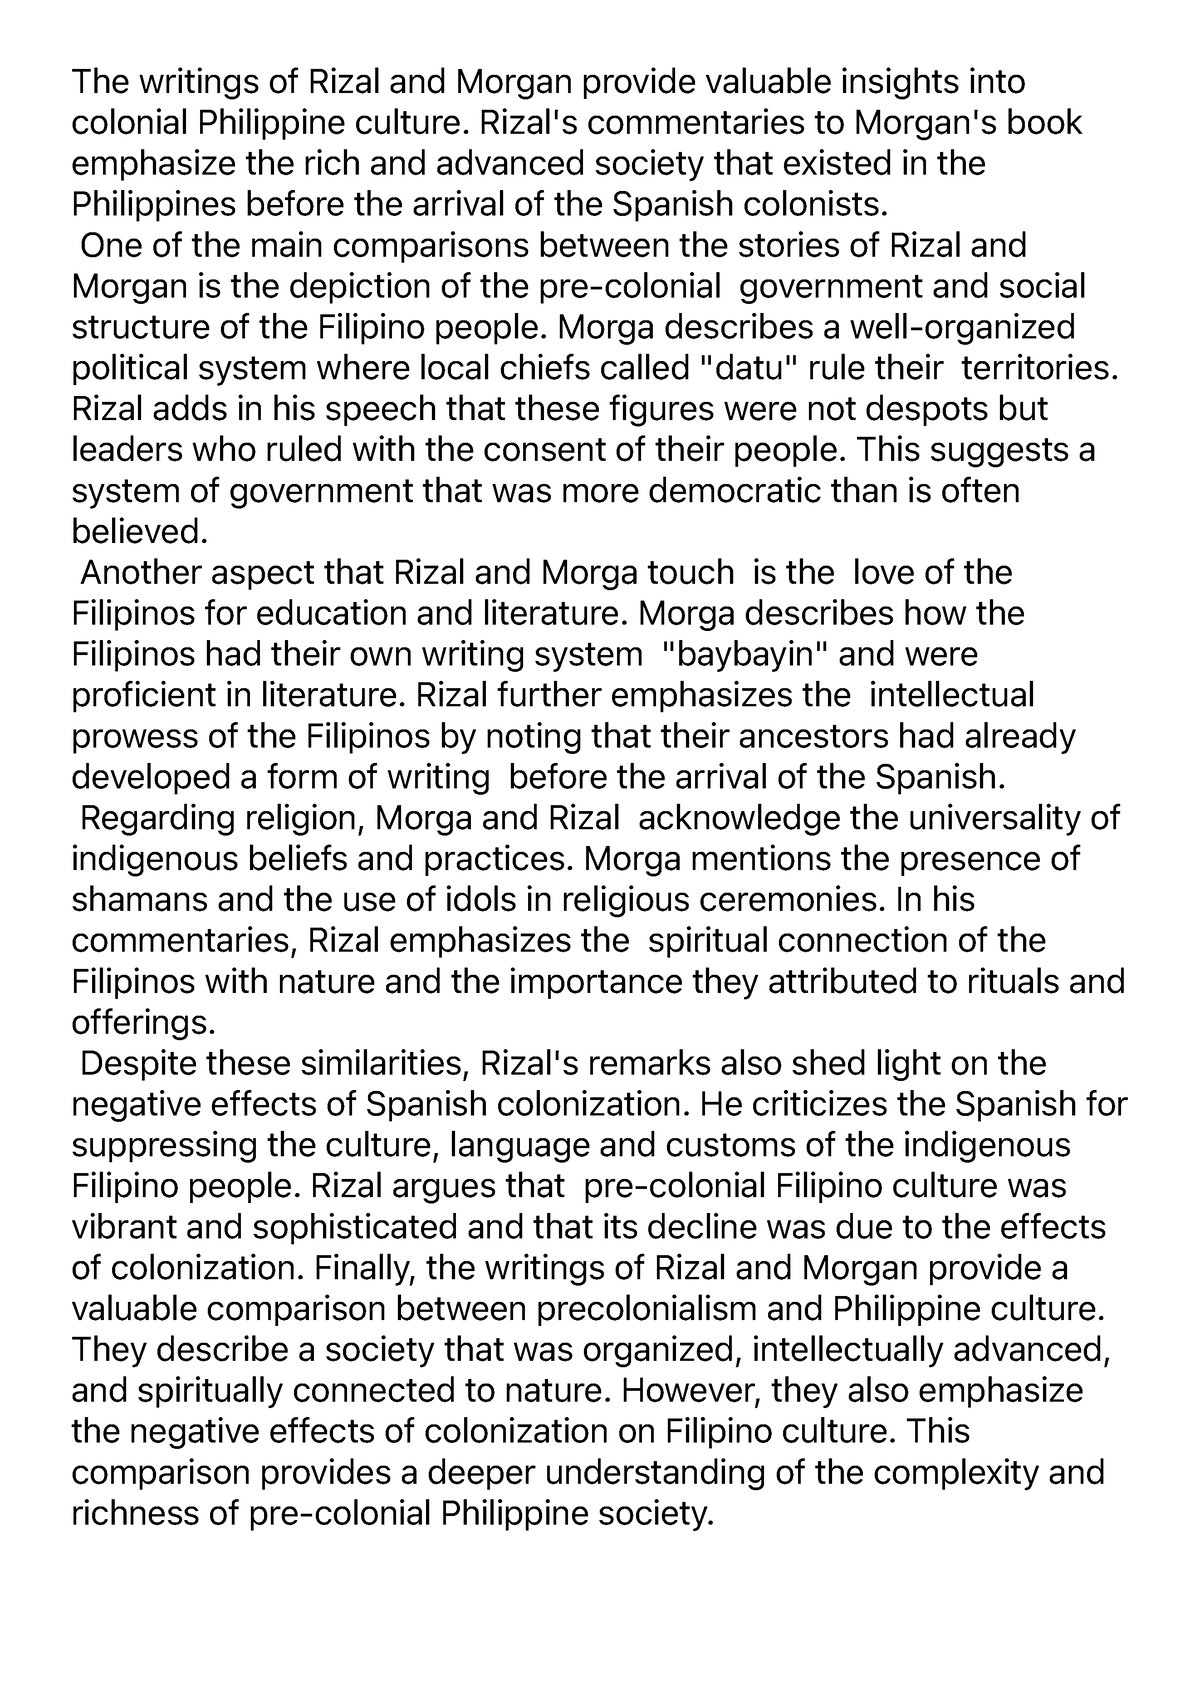 Assignment 10 - The writings of Rizal and Morgan provide valuable ...